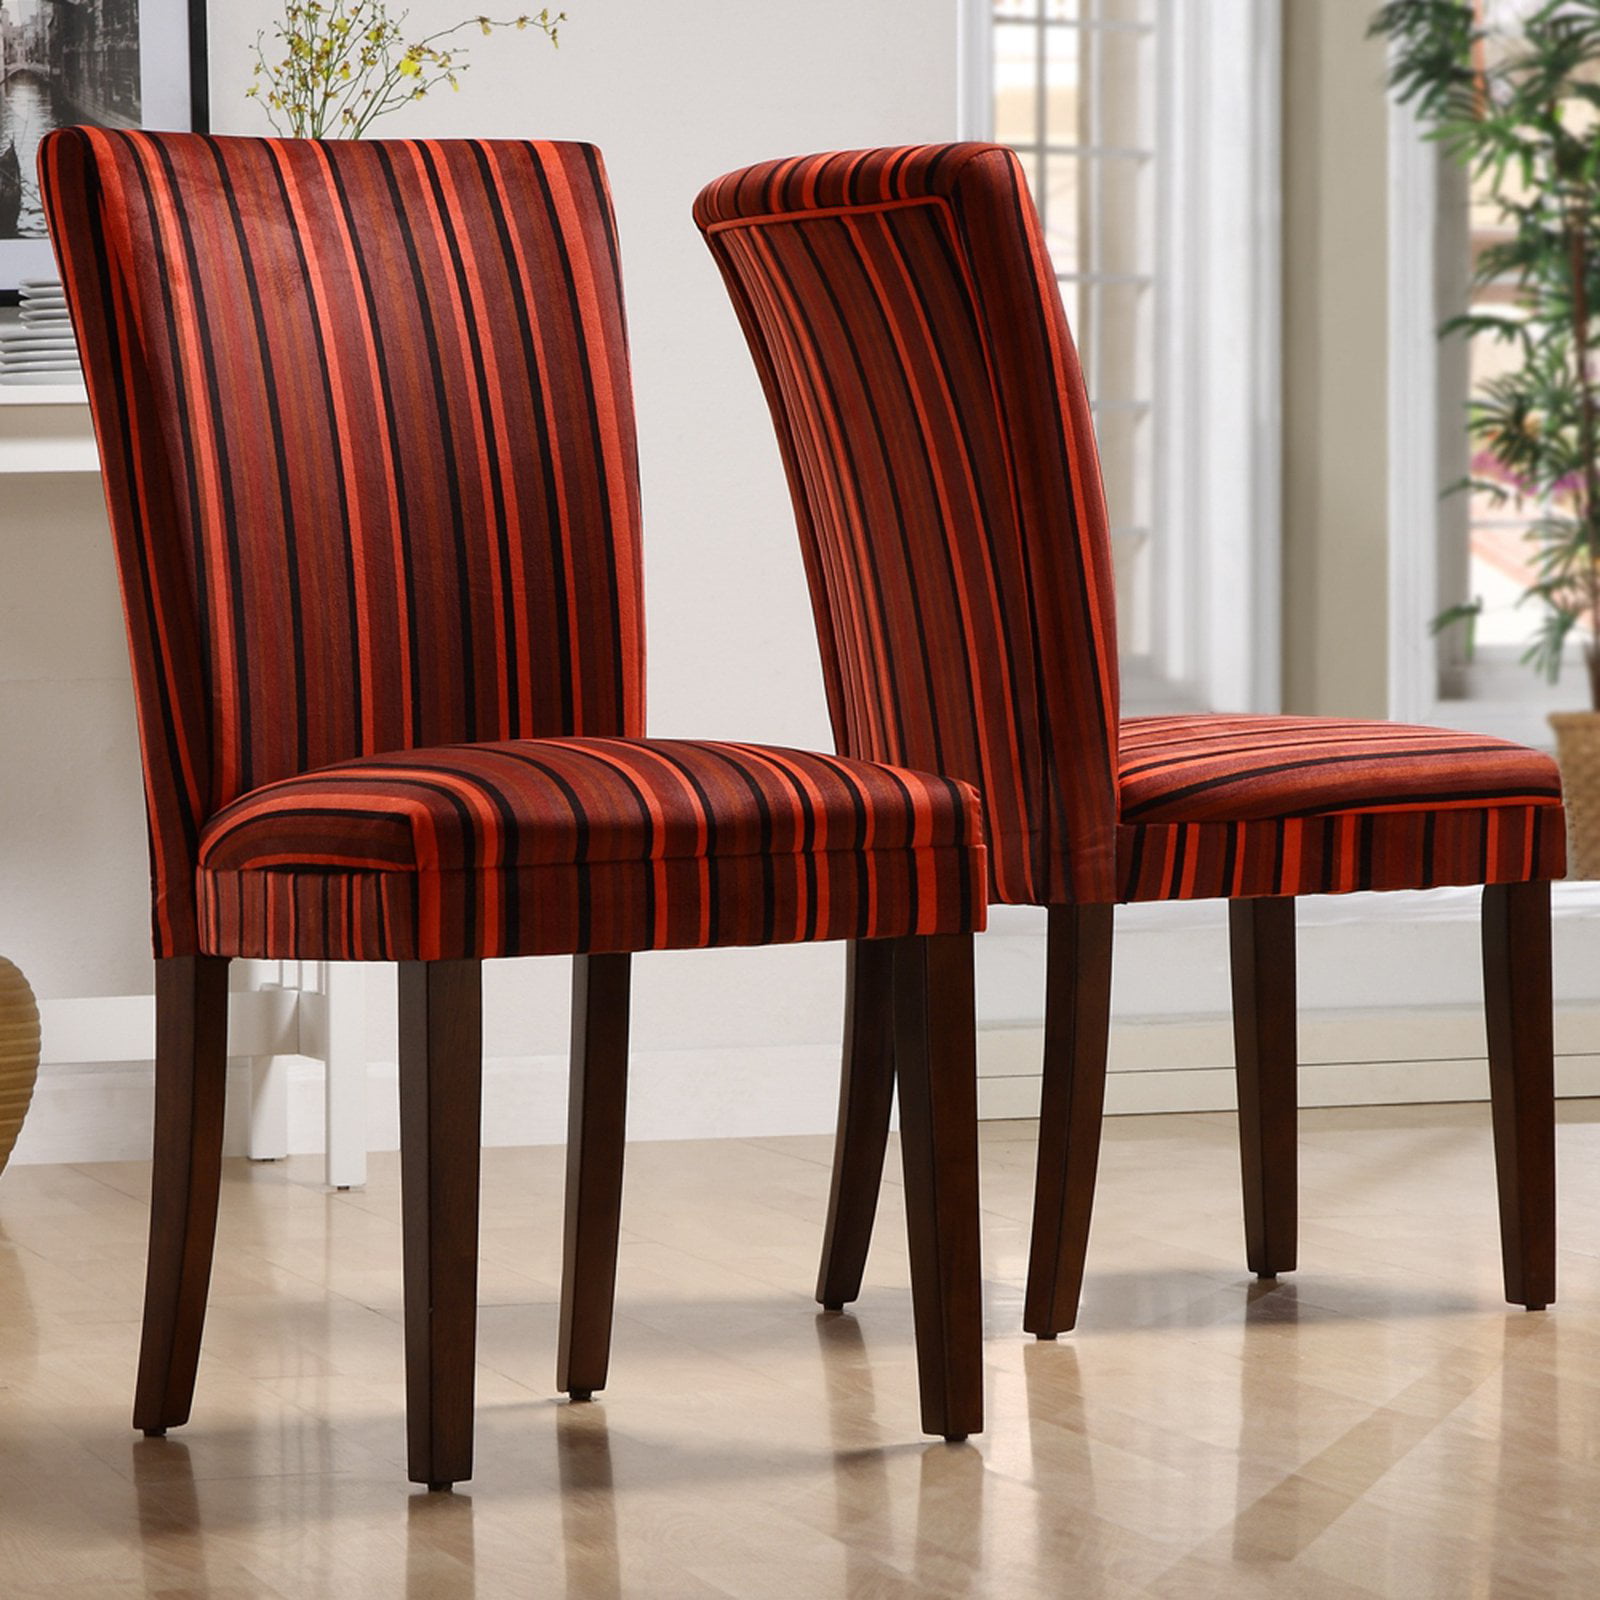 Design Fabric Parson Chairs Brown, Red Leather Parsons Chair